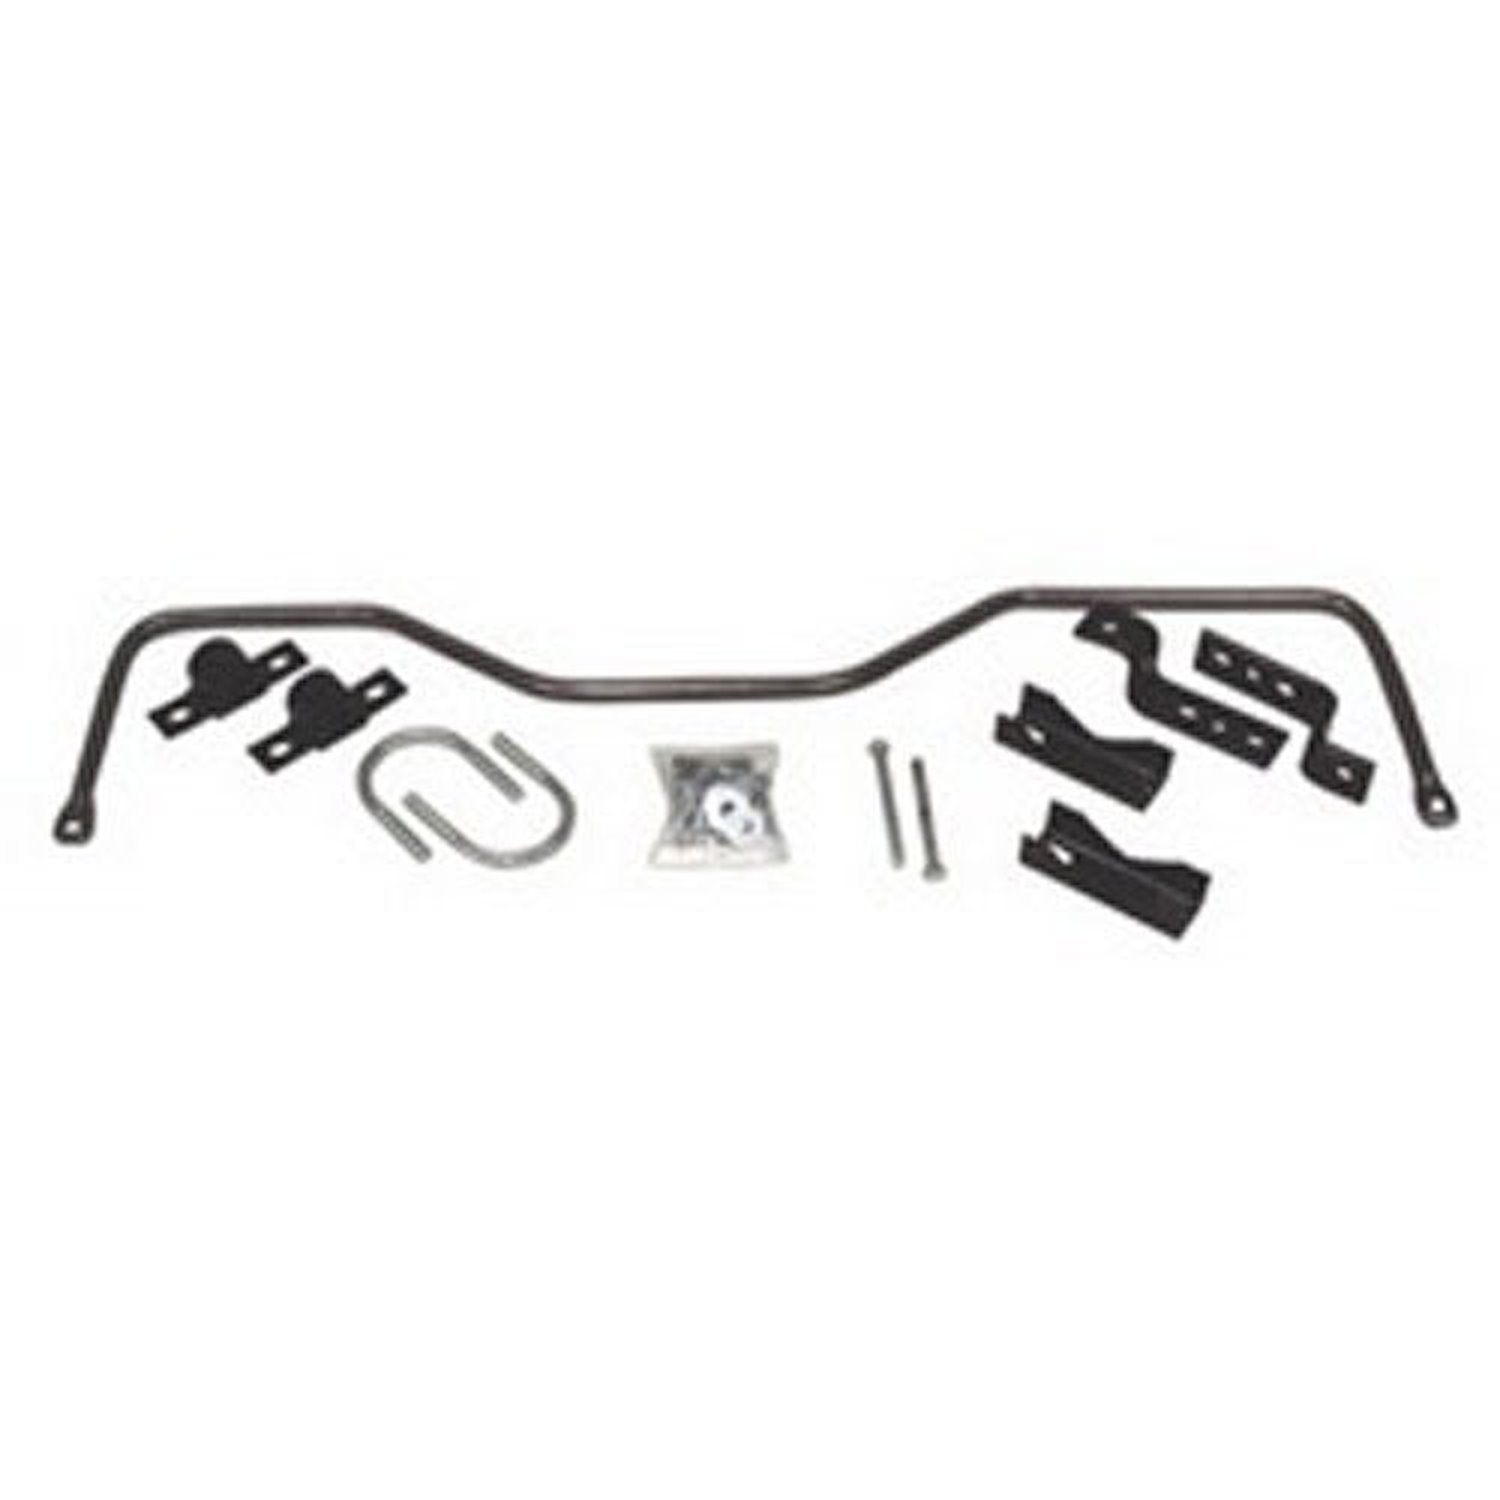 Rear Sway Bar for 2005-2015 Toyota Tacoma 4wd and Pre-Runner 2WD with 4"-6" Front/2"-4" Rear Lift